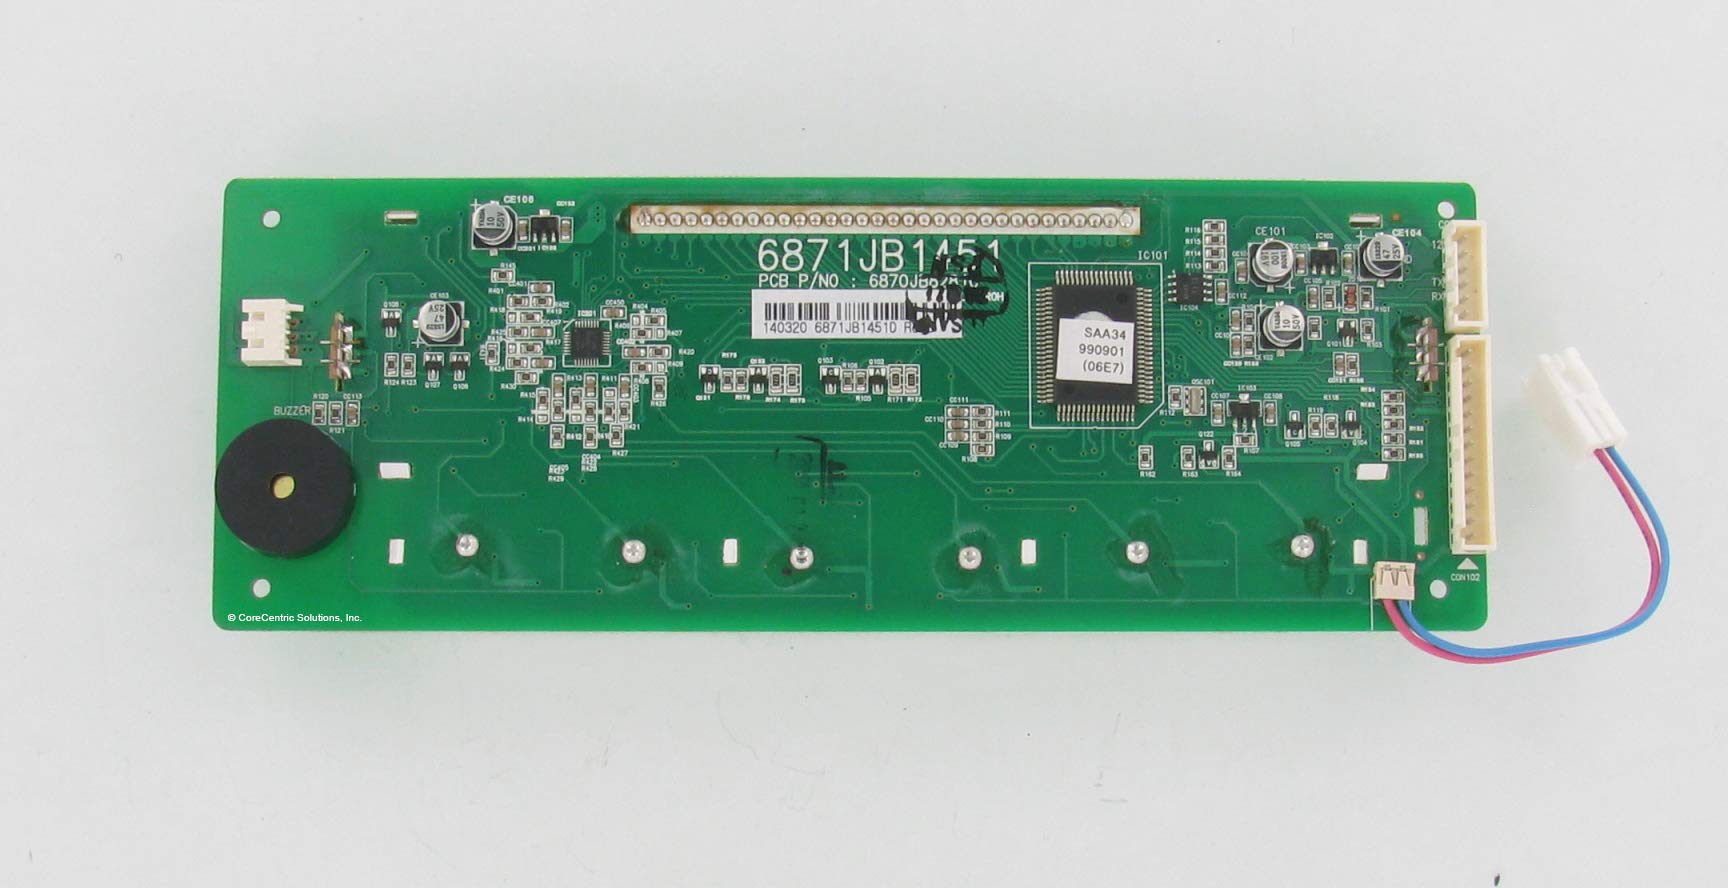 CoreCentric Remanufactured Refrigerator Power Control Board Replacement for LG 6871JB1451D